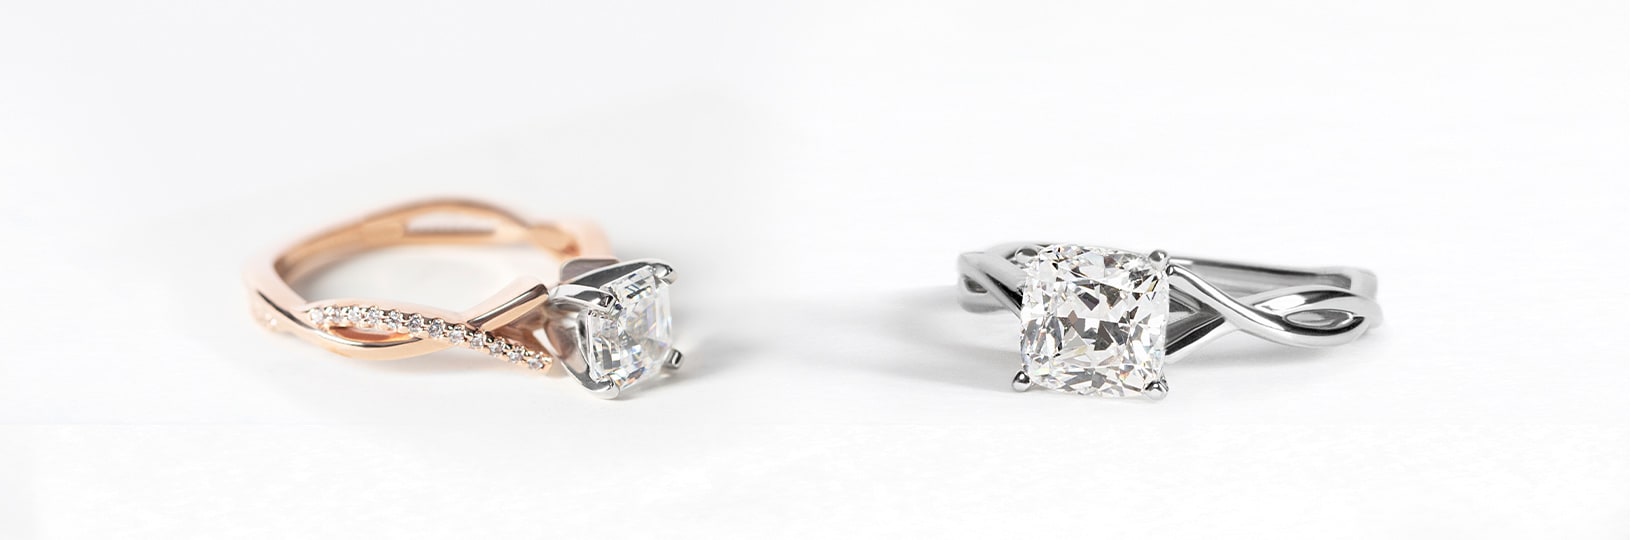 Two engagement rings compared side-by-side